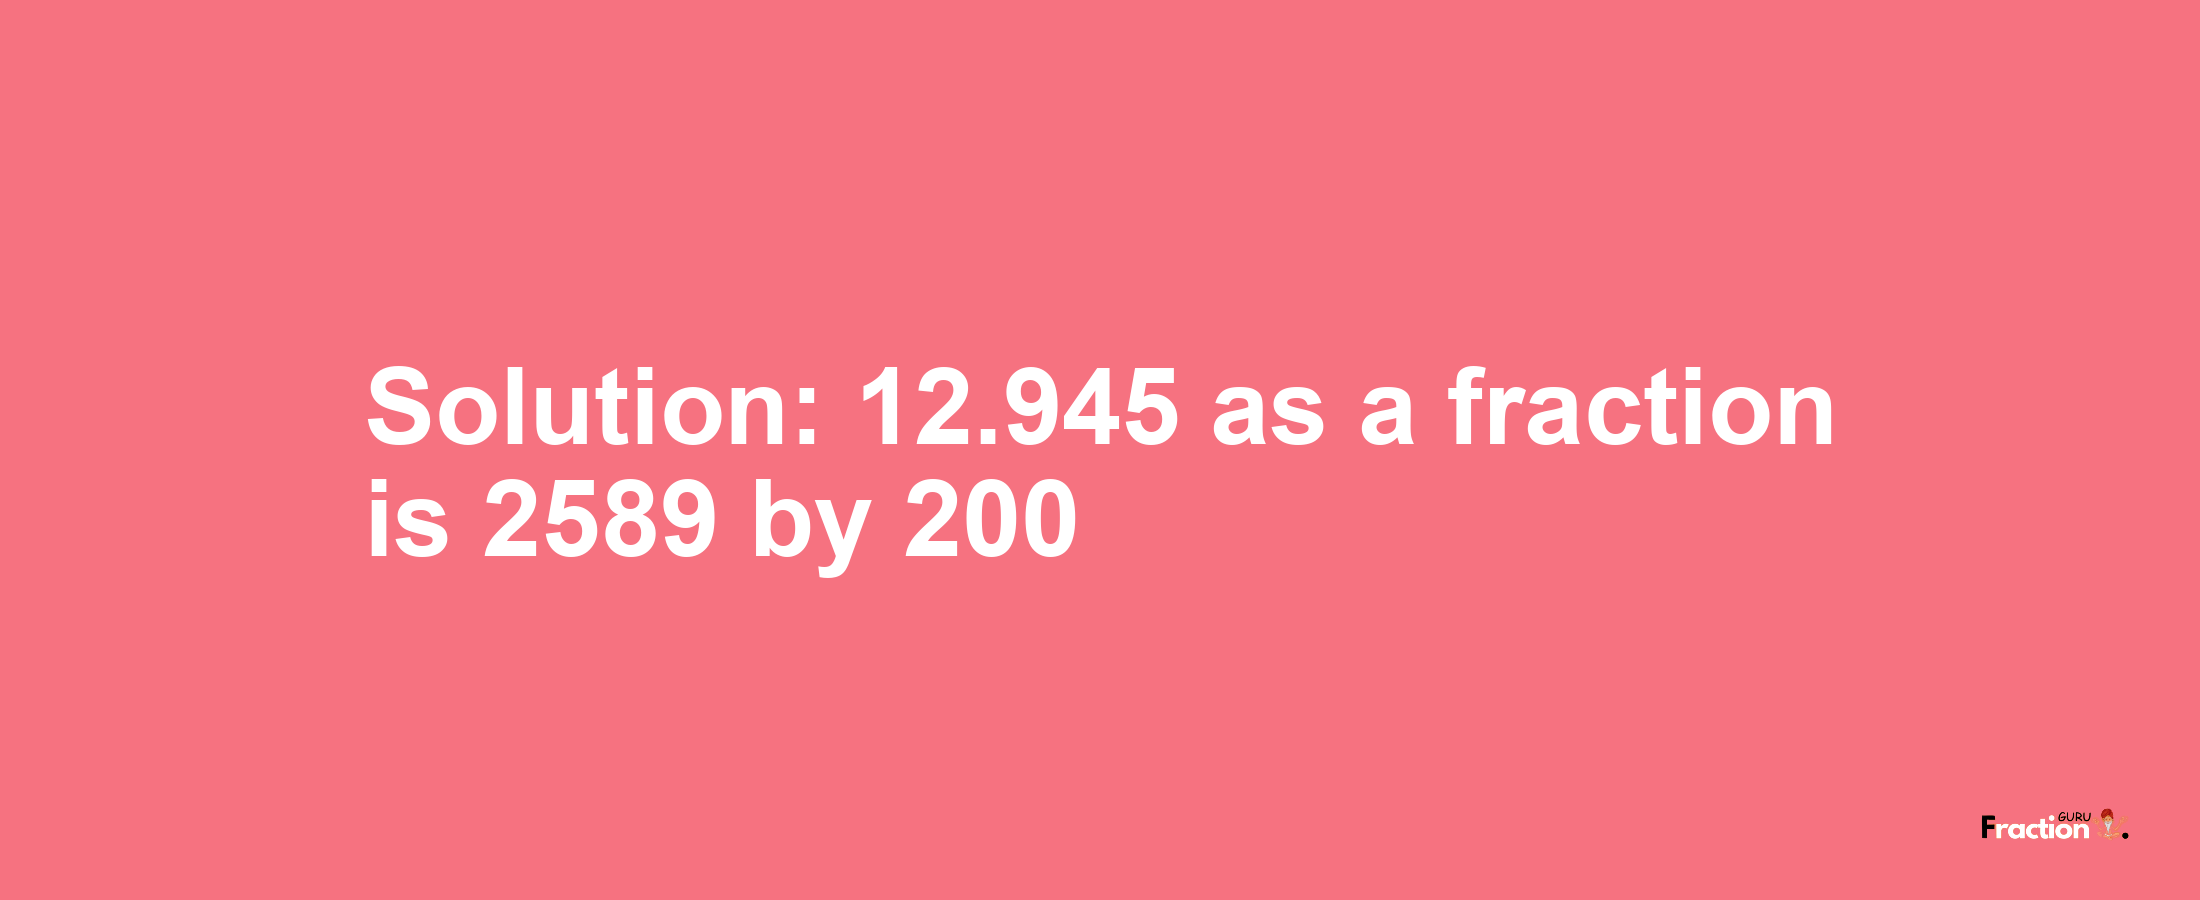 Solution:12.945 as a fraction is 2589/200